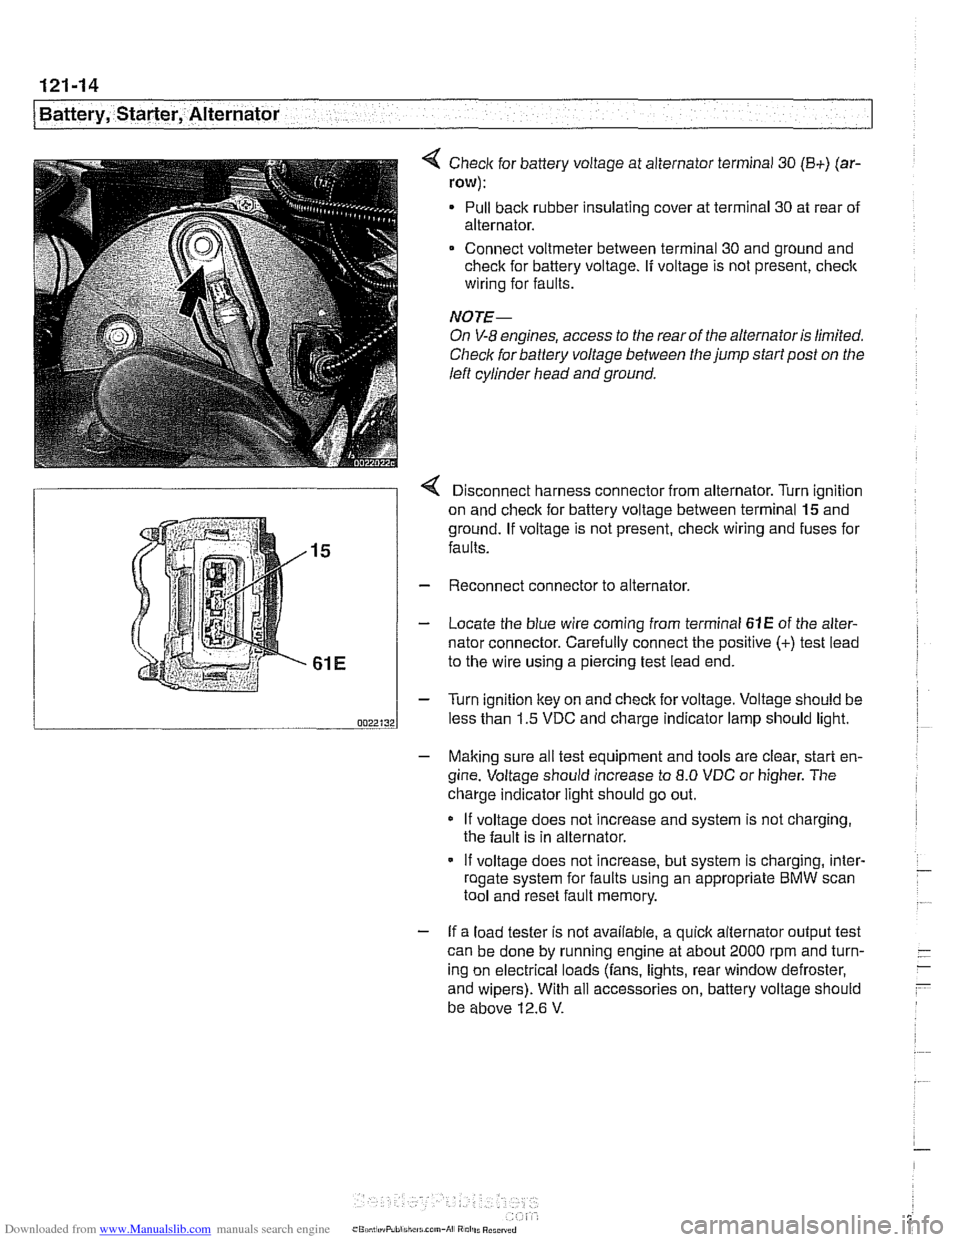 BMW 525i 1999 E39 Workshop Manual Downloaded from www.Manualslib.com manuals search engine 
- - 
/Battery, Starter,  Alternator -- - -. - --I 
< Check for battery  voltage  at alternator  terminal 30 (B+) (ar- 
row): 
Pull back rubber